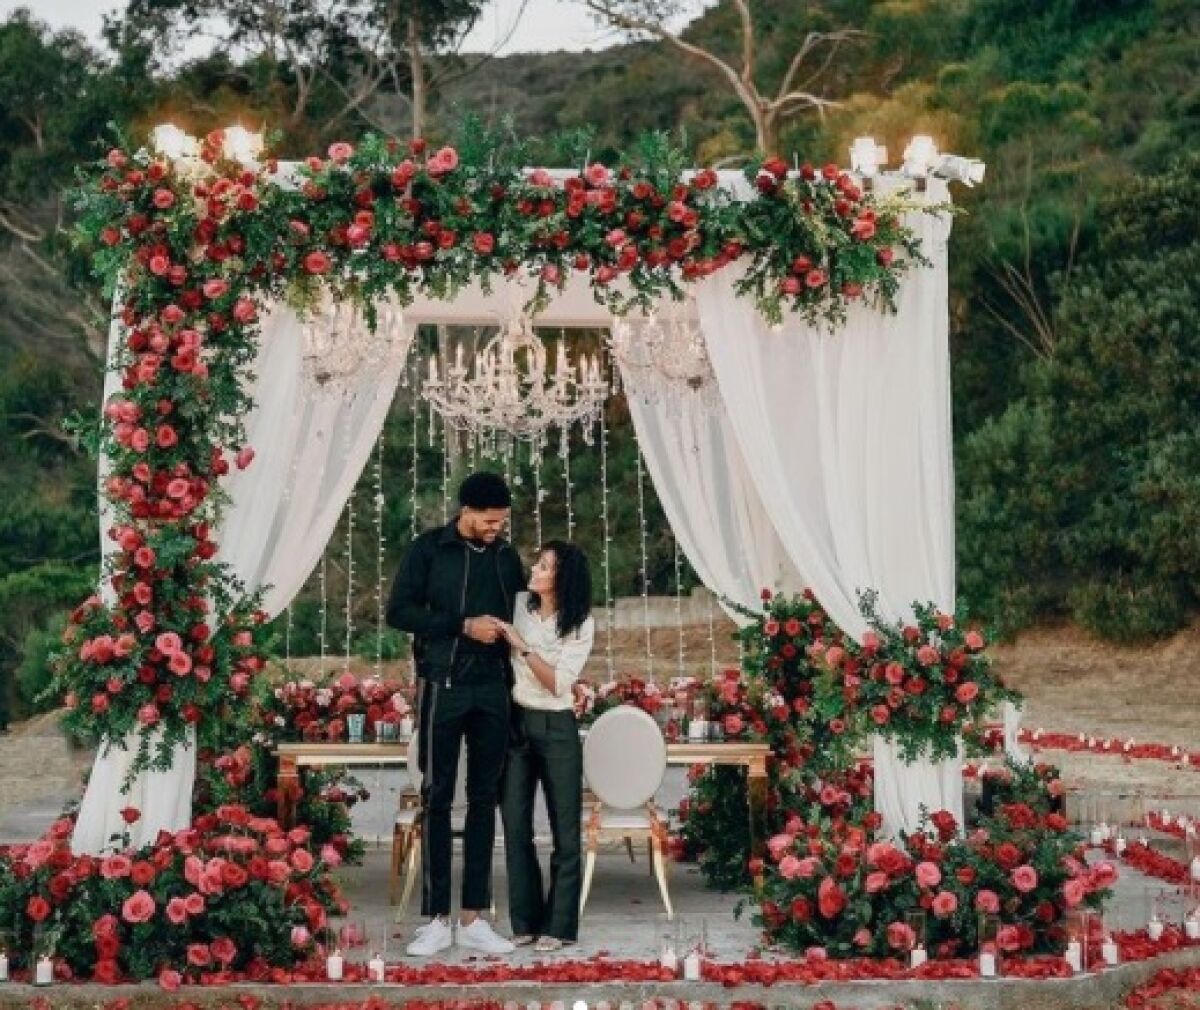 A gazebo festooned with roses makes for a romantic proposal by Tobias Harris to Jasmine Winton.